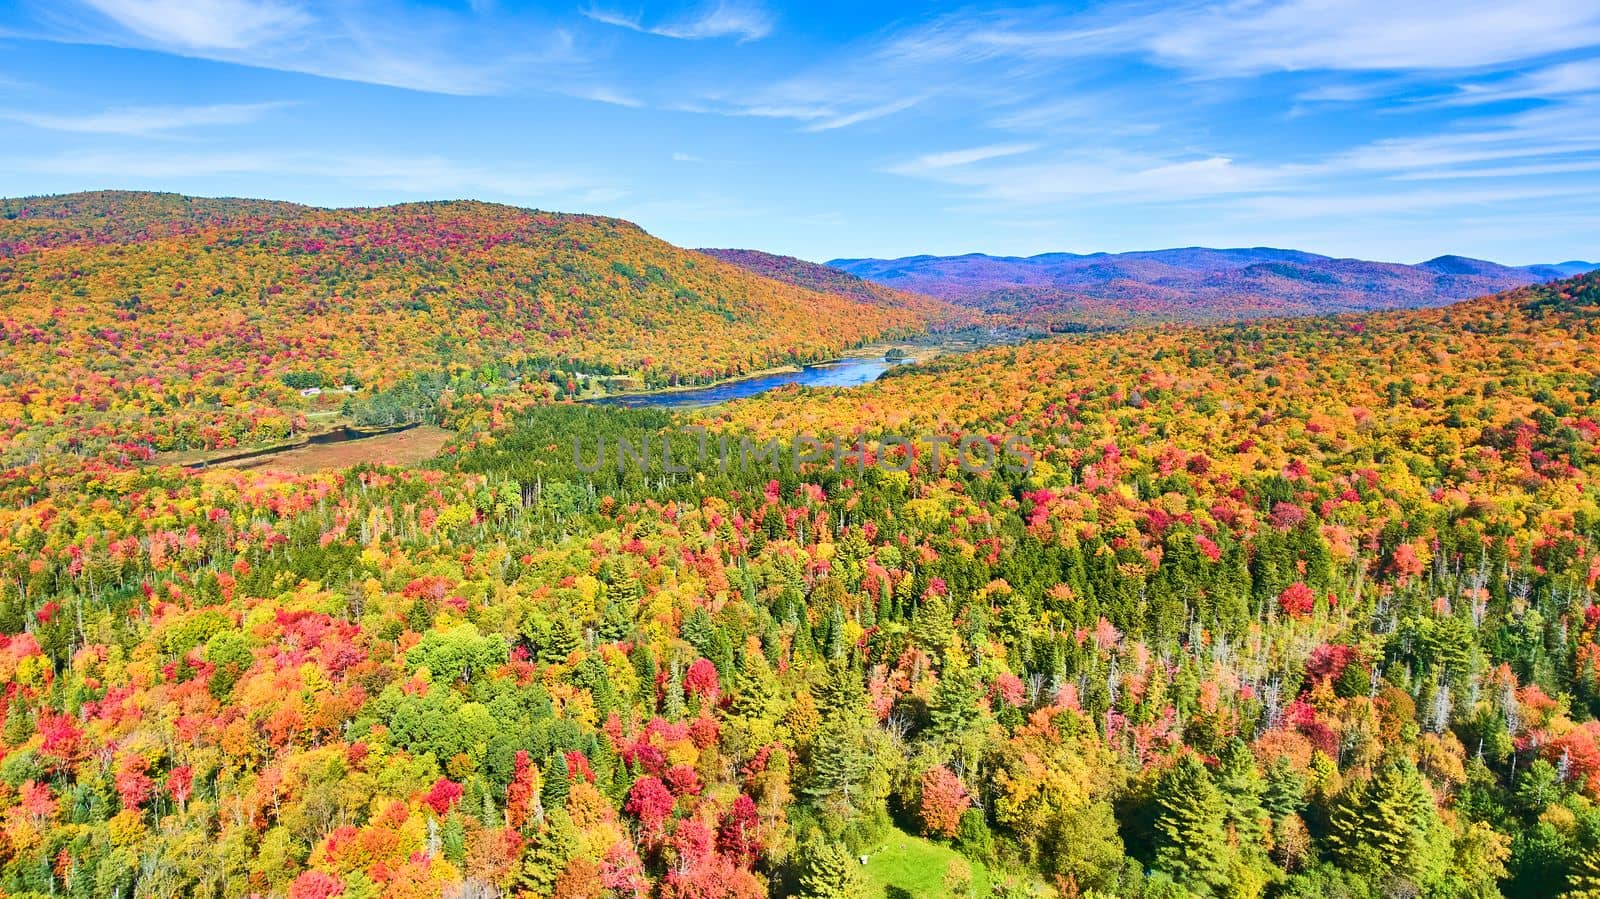 Image of New York landscape aerial of colorful fall forests and mountains with small lake